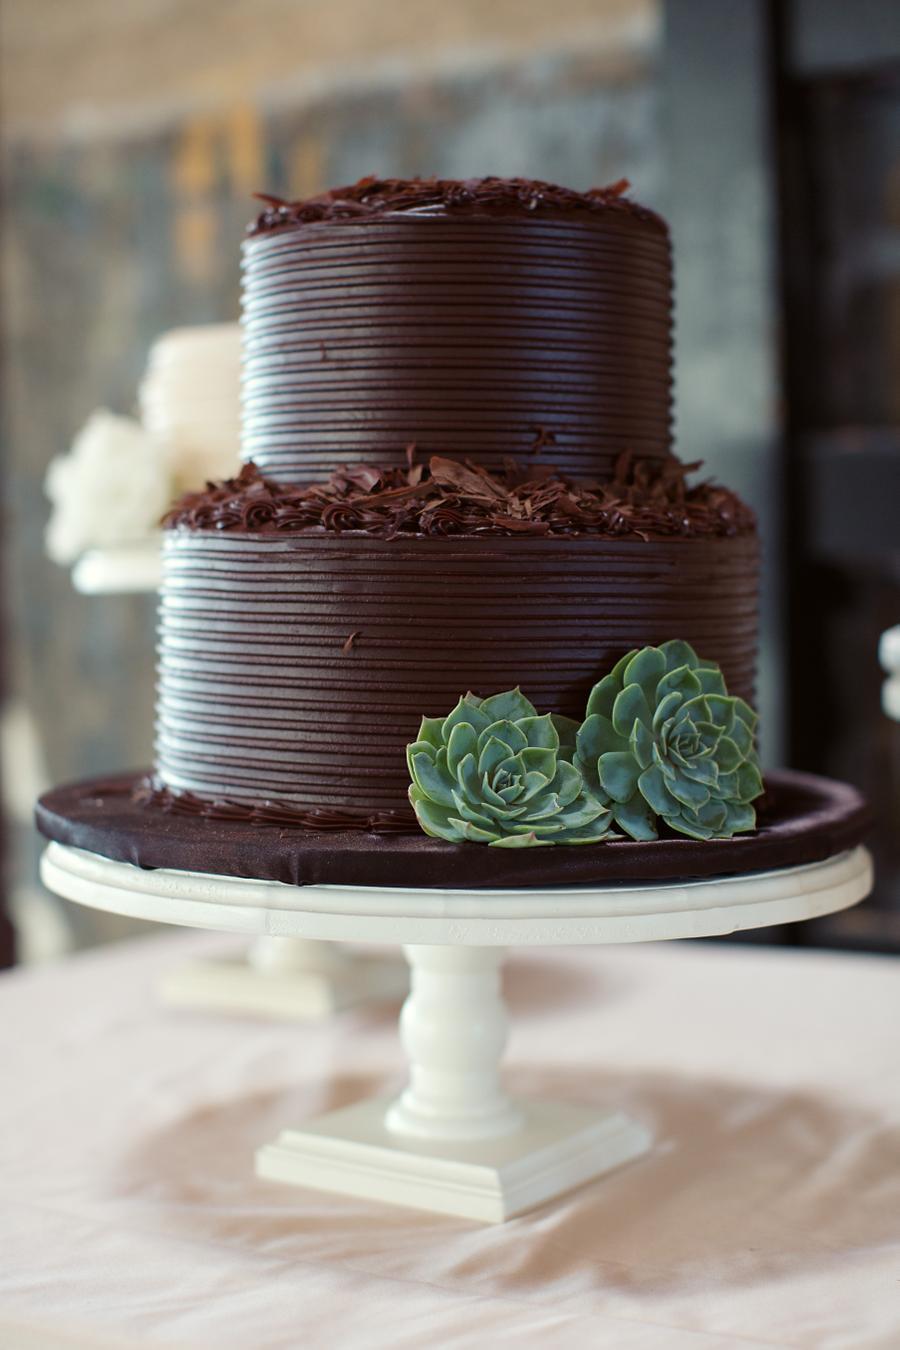 Possibly The Cutest Wedding Cakes Ever - MODwedding | Chocolate wedding cake,  Cake, Cake desserts